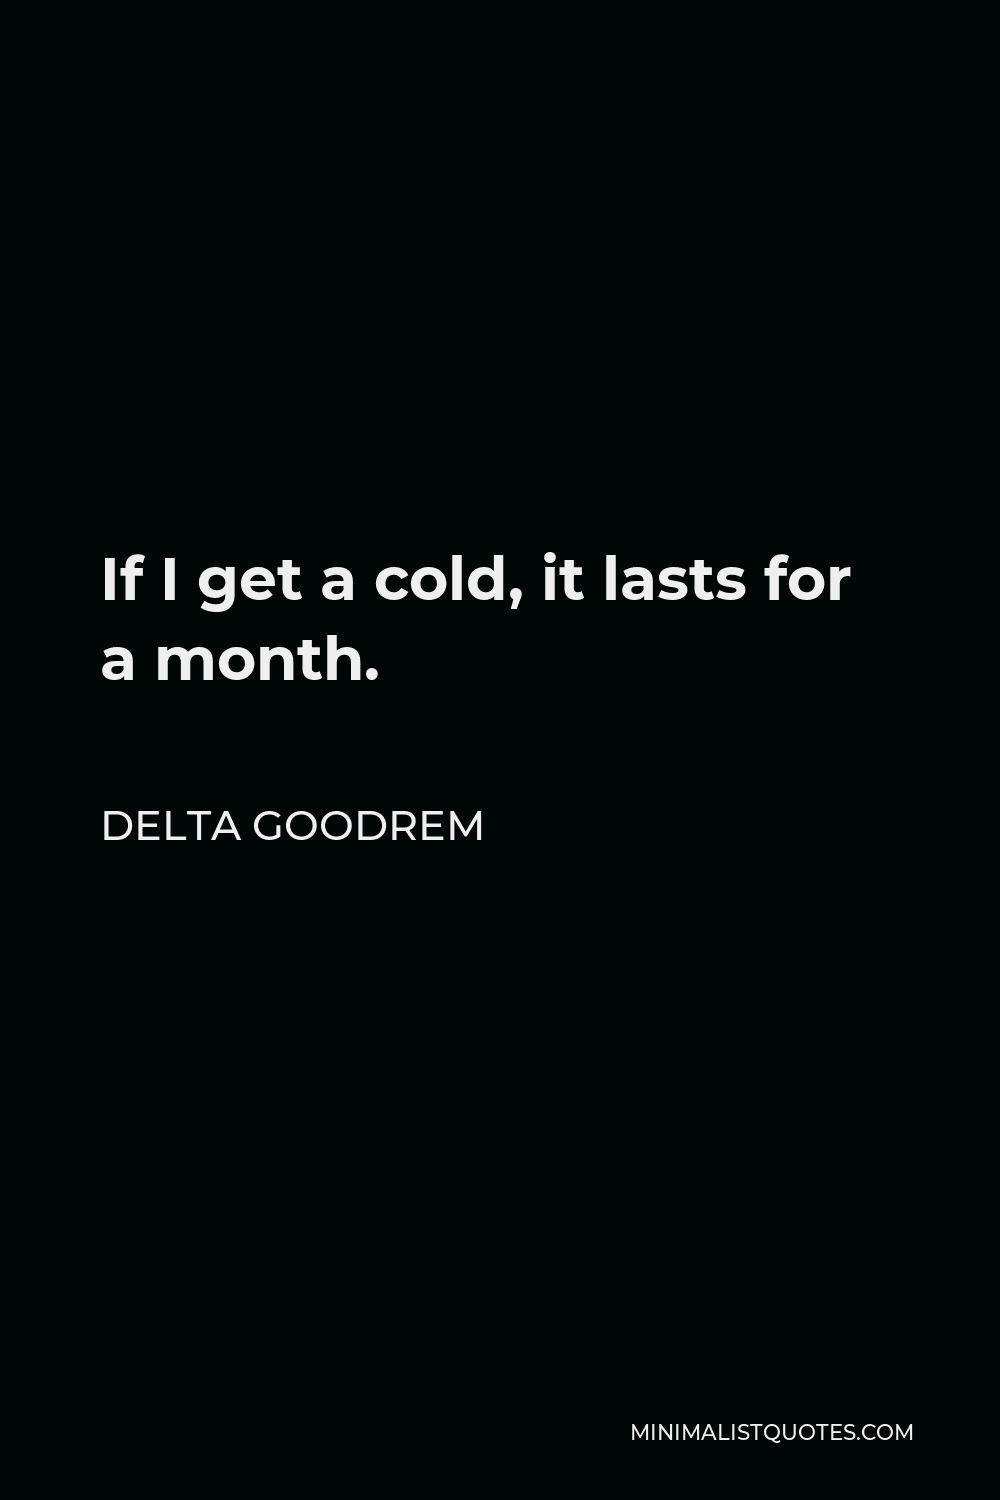 Delta Goodrem Quote - If I get a cold, it lasts for a month.